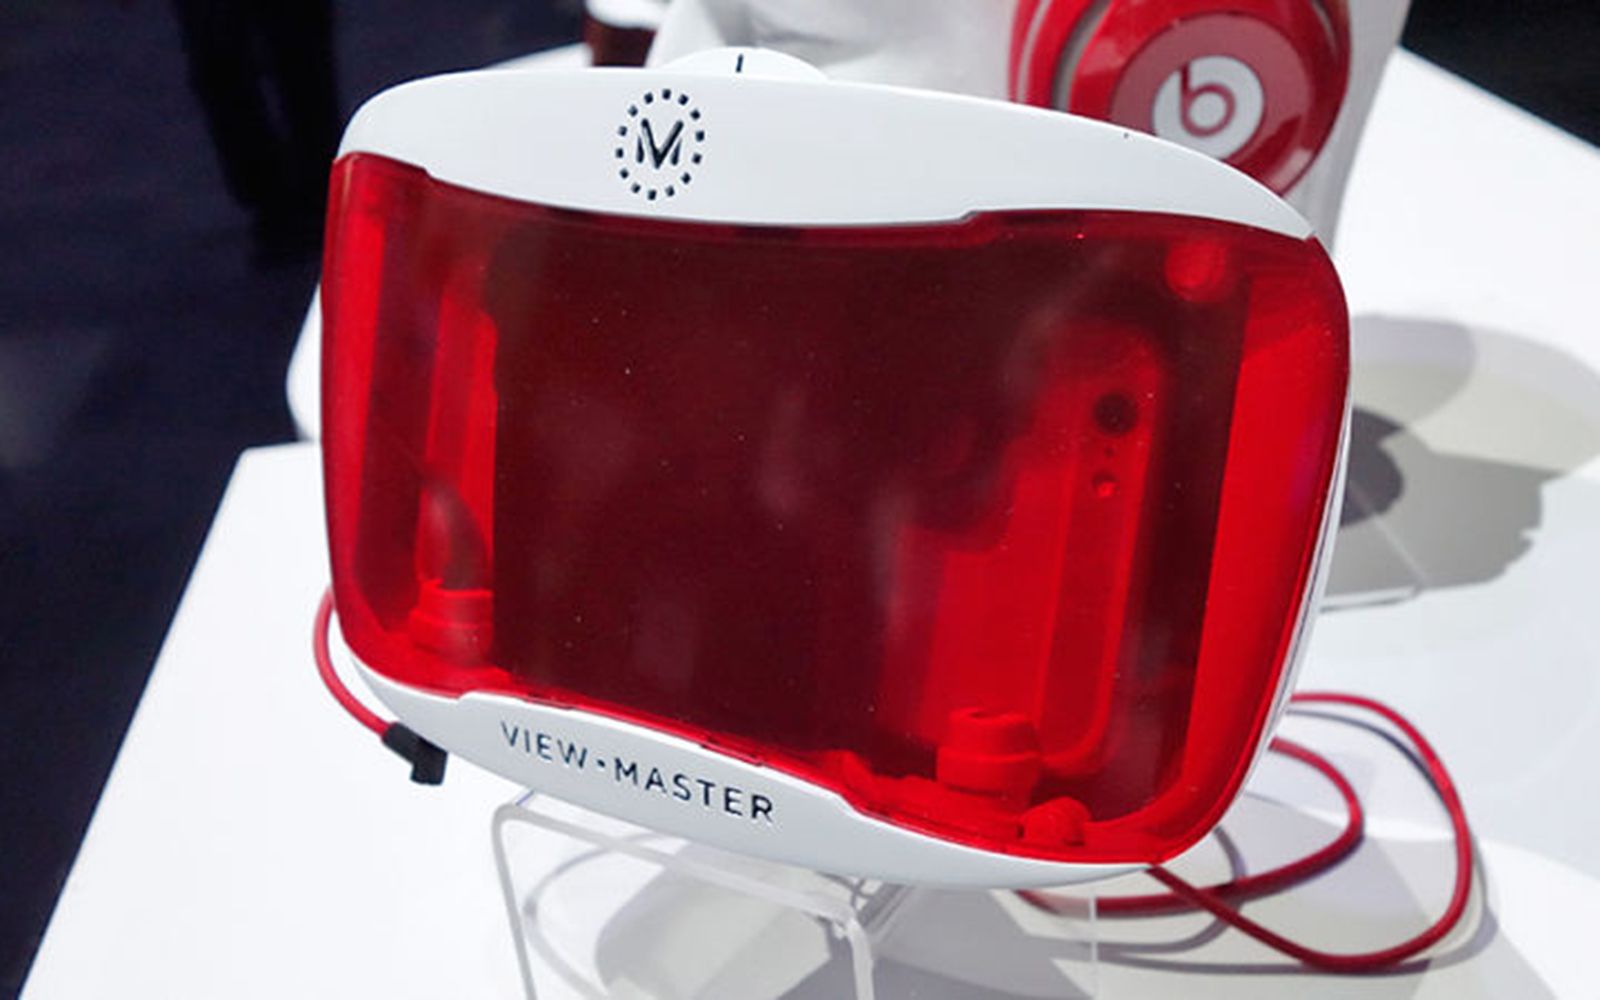 mattel view master 2 0 takes google cardboard vr to another level image 1